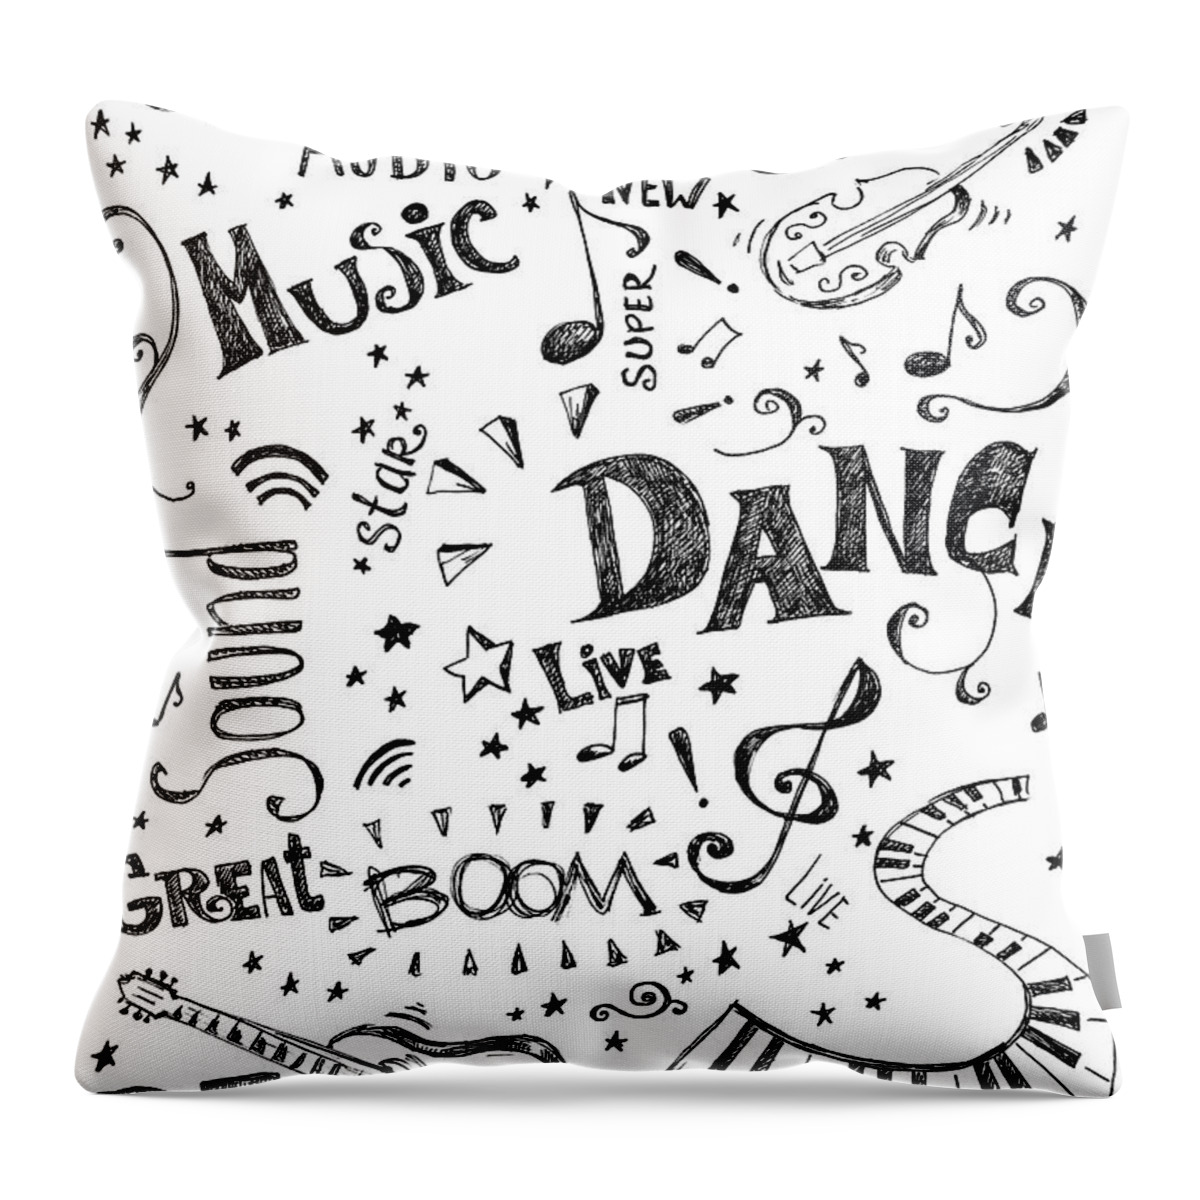 Rock Music Throw Pillow featuring the digital art Background Made Up Of Music Doodles by Kalistratova